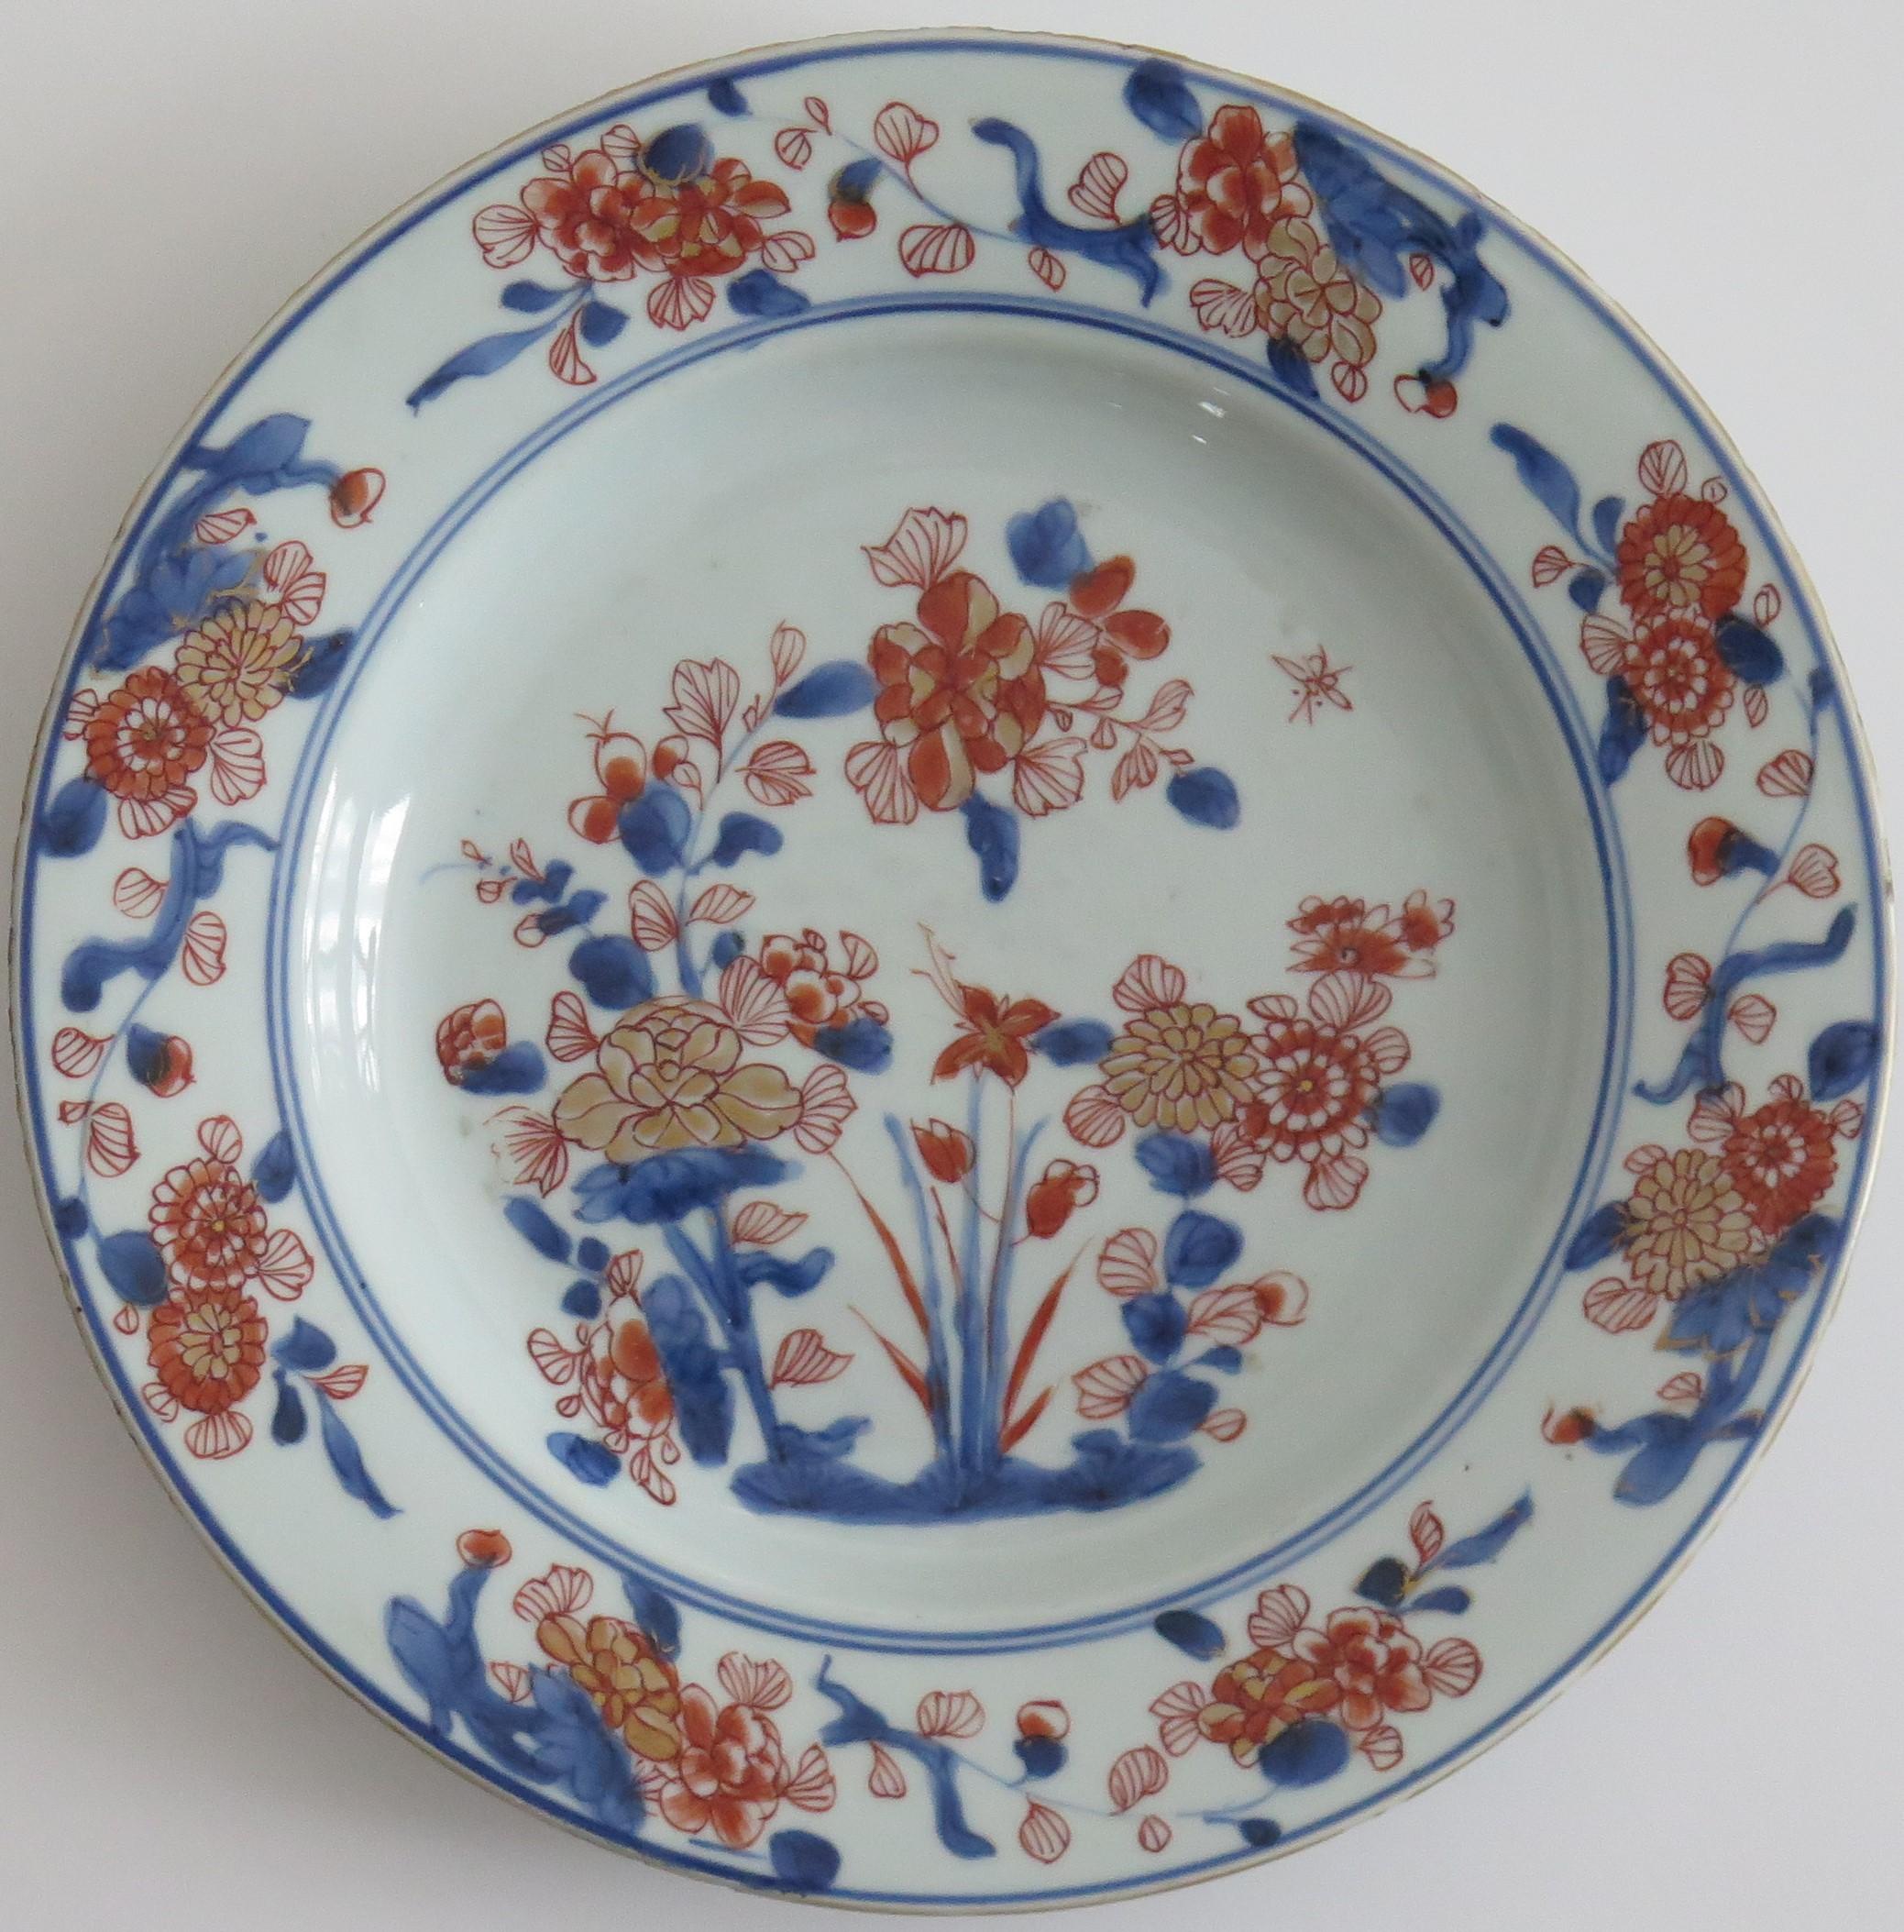 This is a beautifully hand painted Chinese Export porcelain plate or bowl from the Qing, Kangxi period, 1662-1722, fully marked to the base with the Kangxi period Artemisia Leaf mark within a double blue ring.

The plate is of dinner plate size,